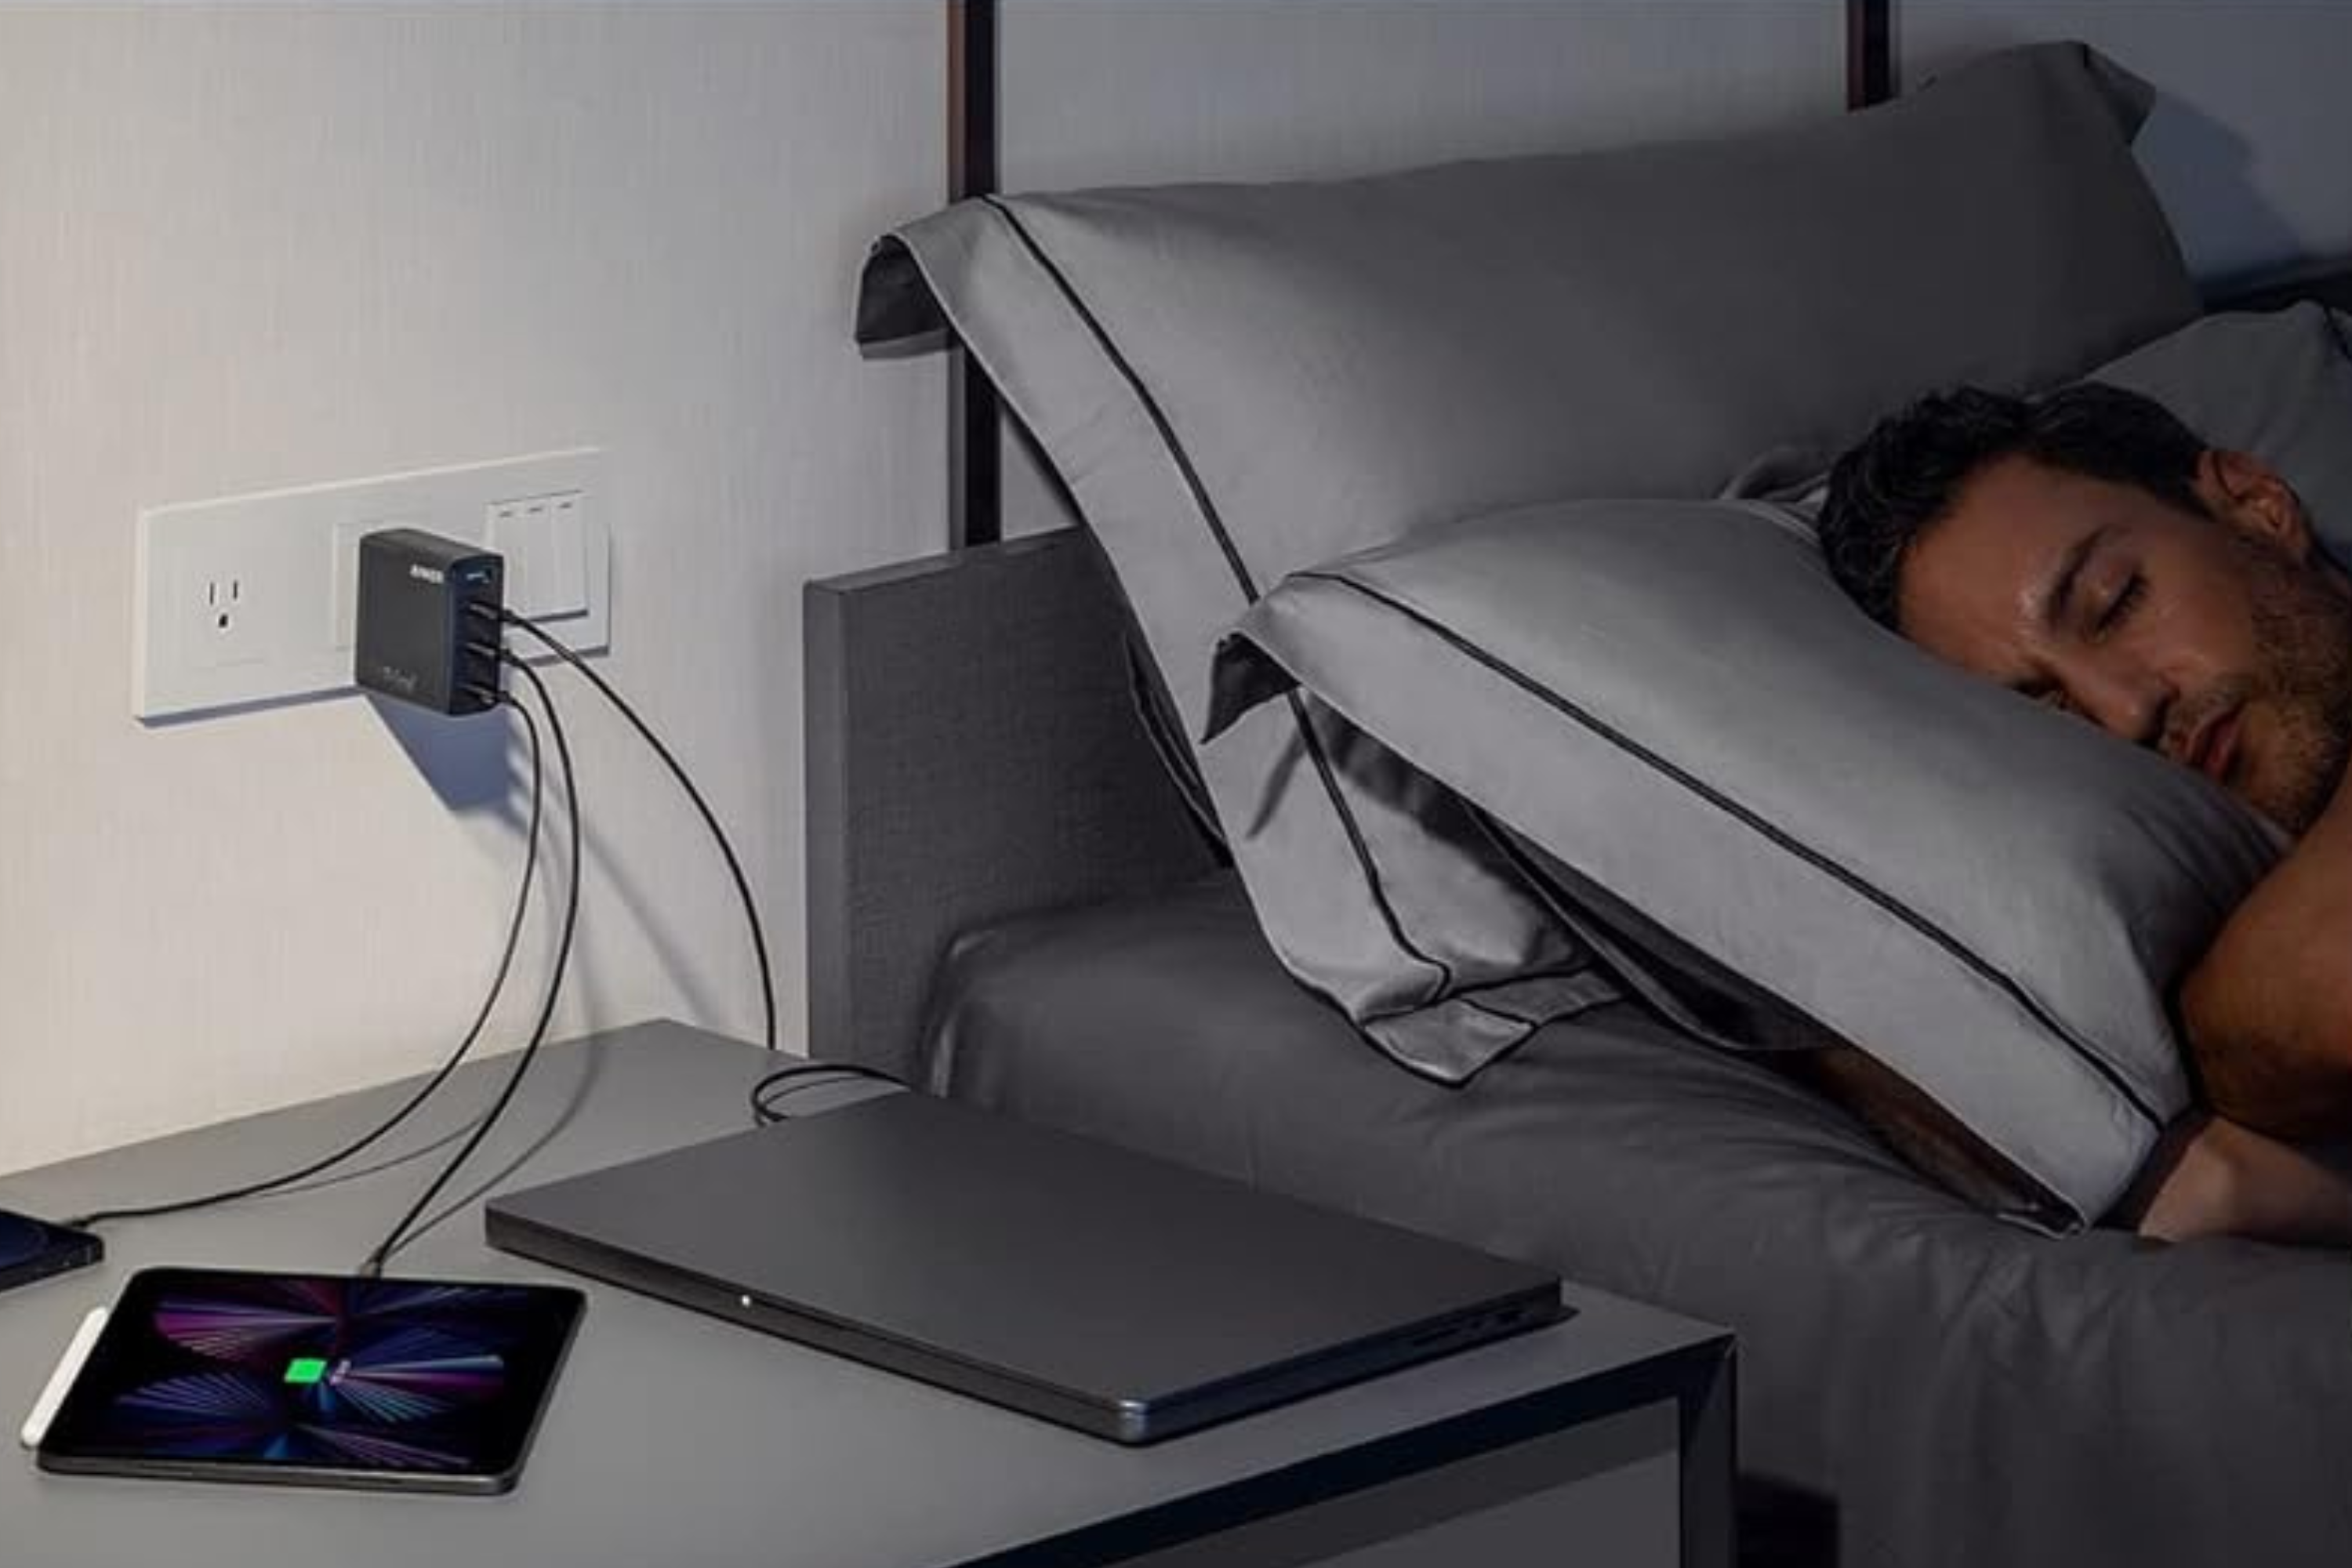 Anker 747 charger charging three devices while person next to it sleeps